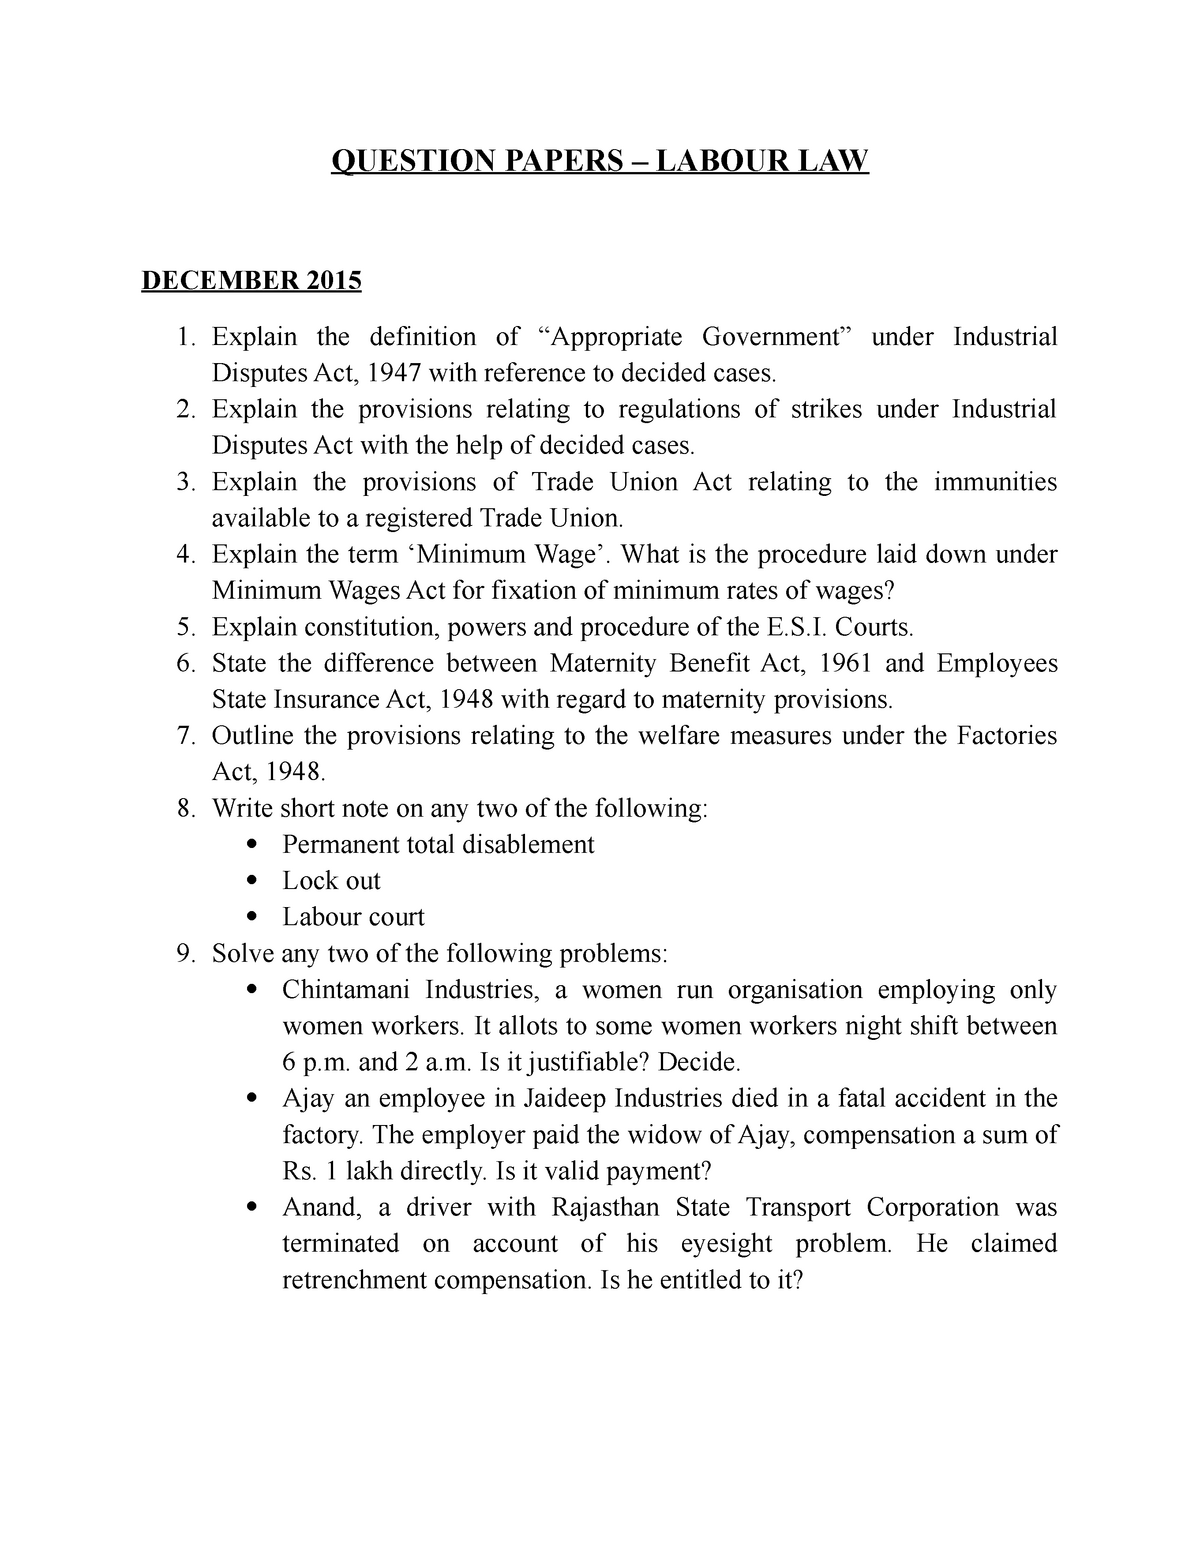 corporate law question paper guwahati university